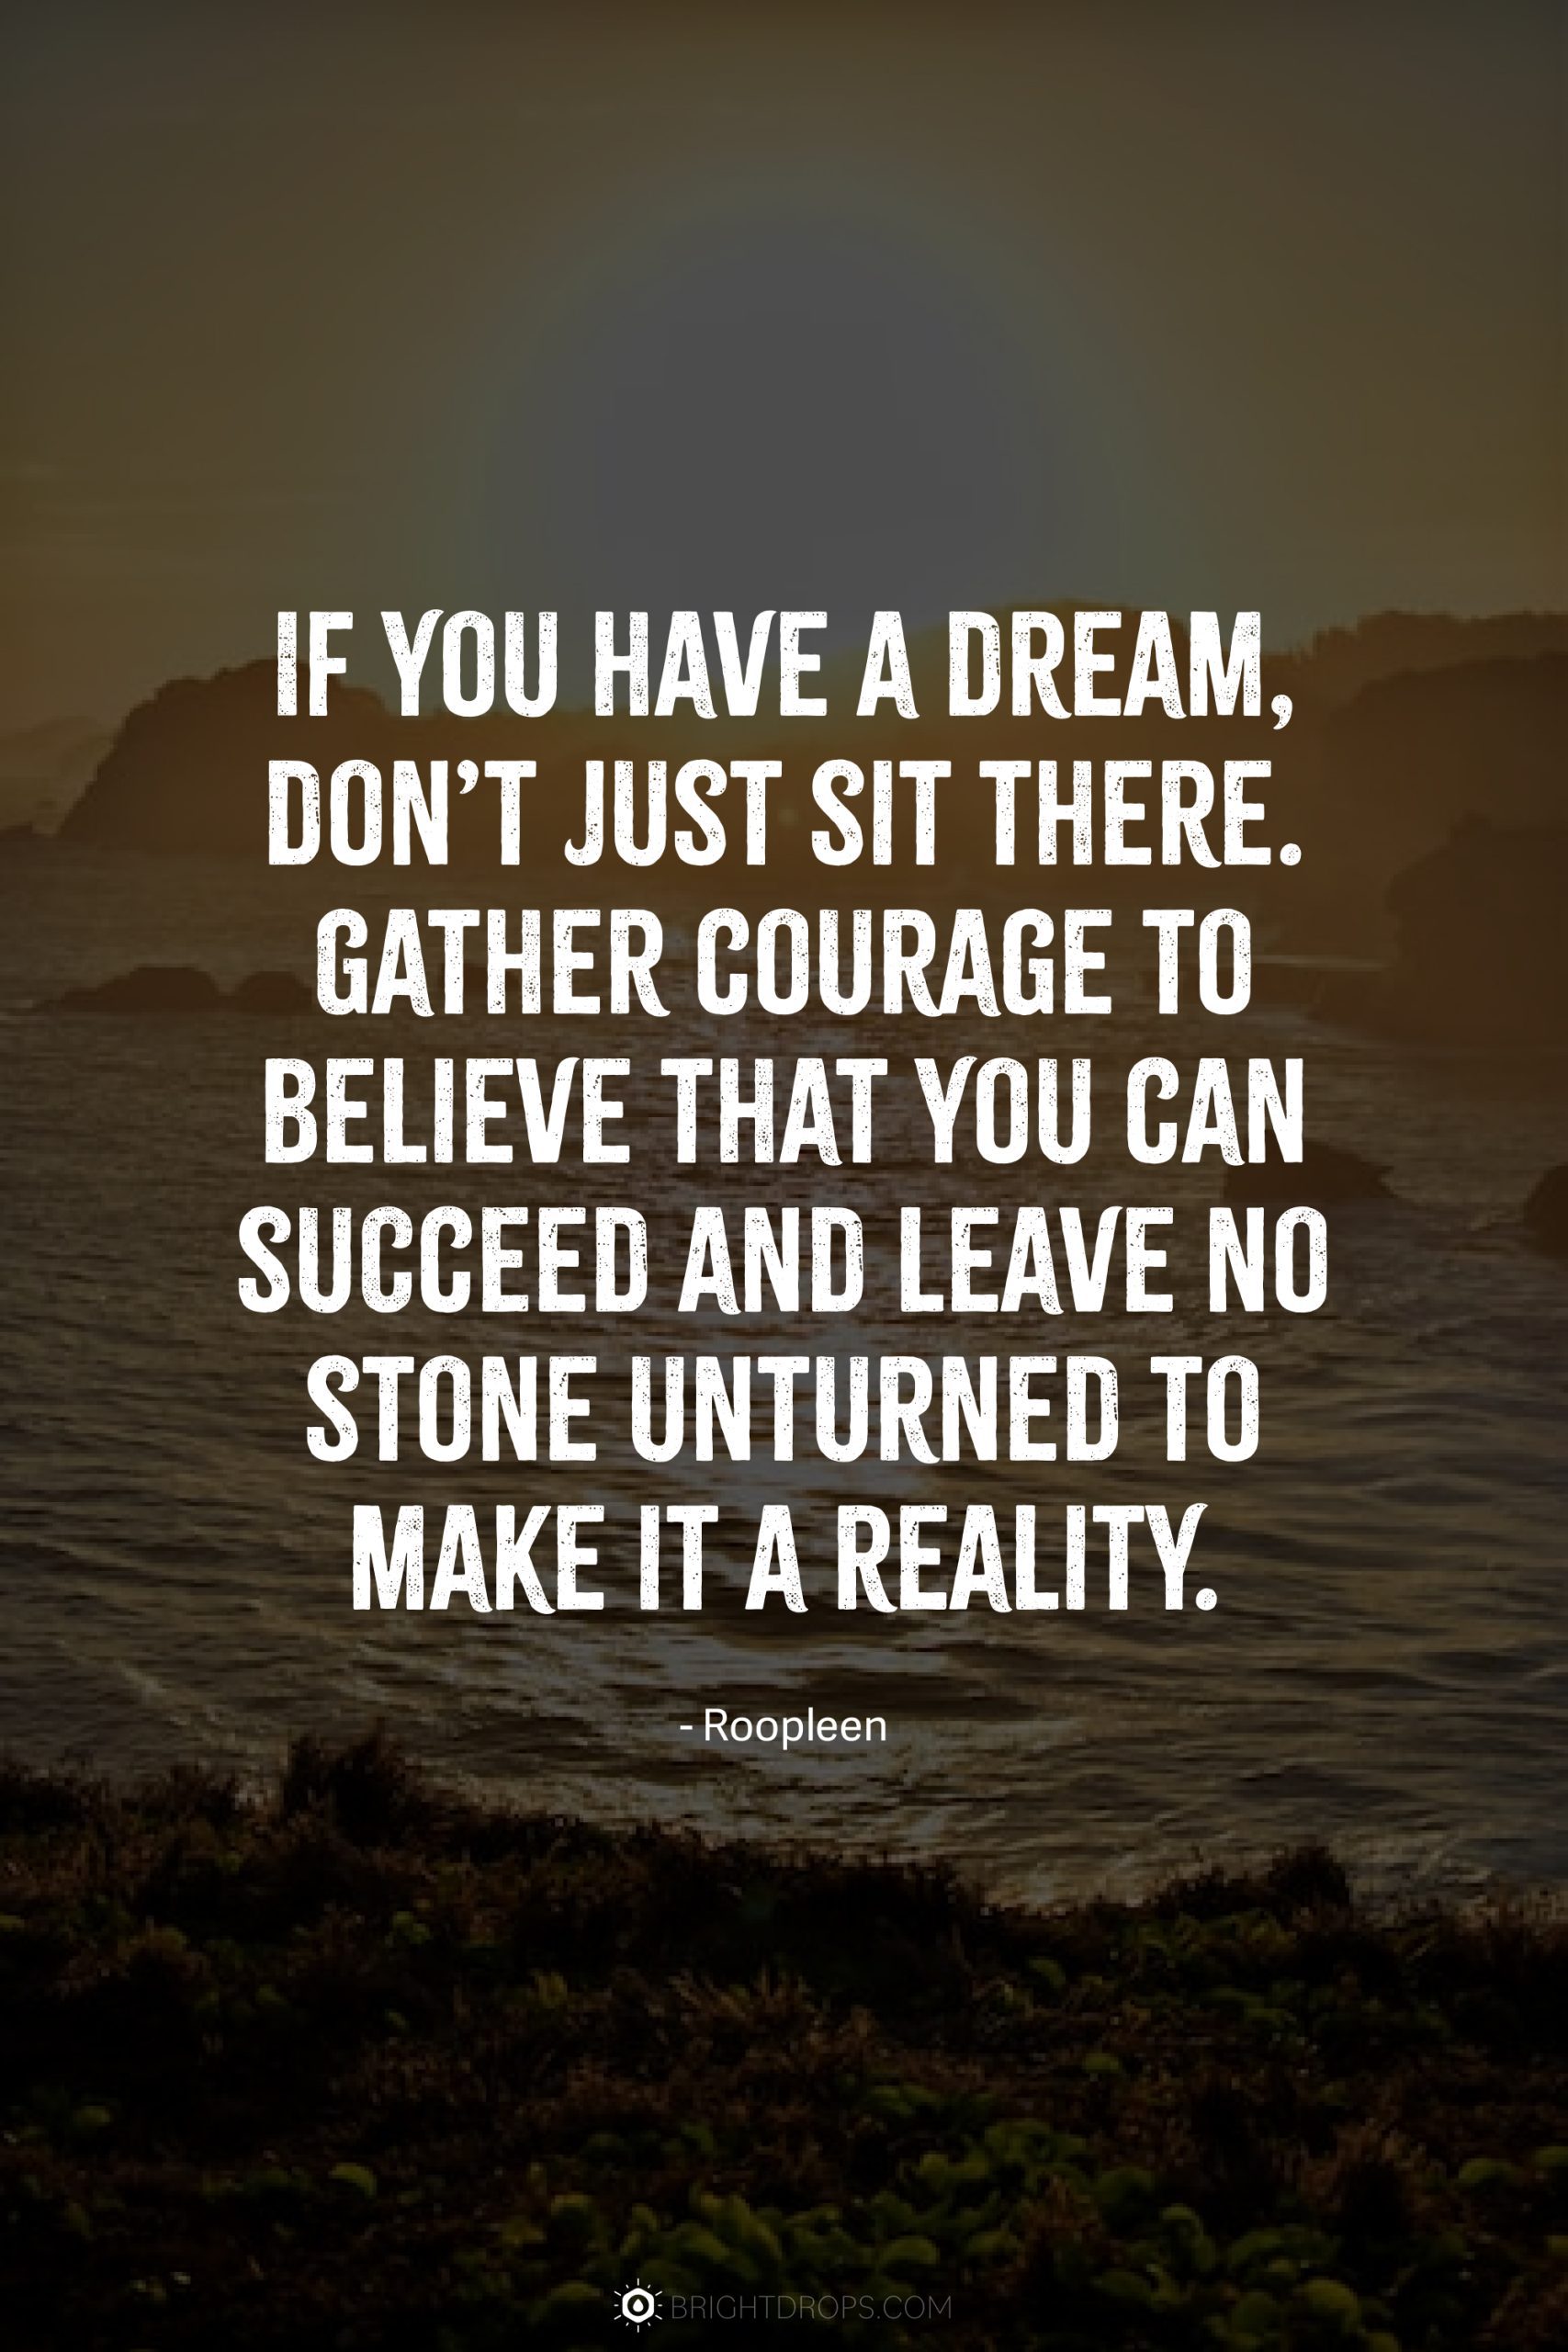 If you have a dream, don’t just sit there. Gather courage to believe that you can succeed and leave no stone unturned to make it a reality.